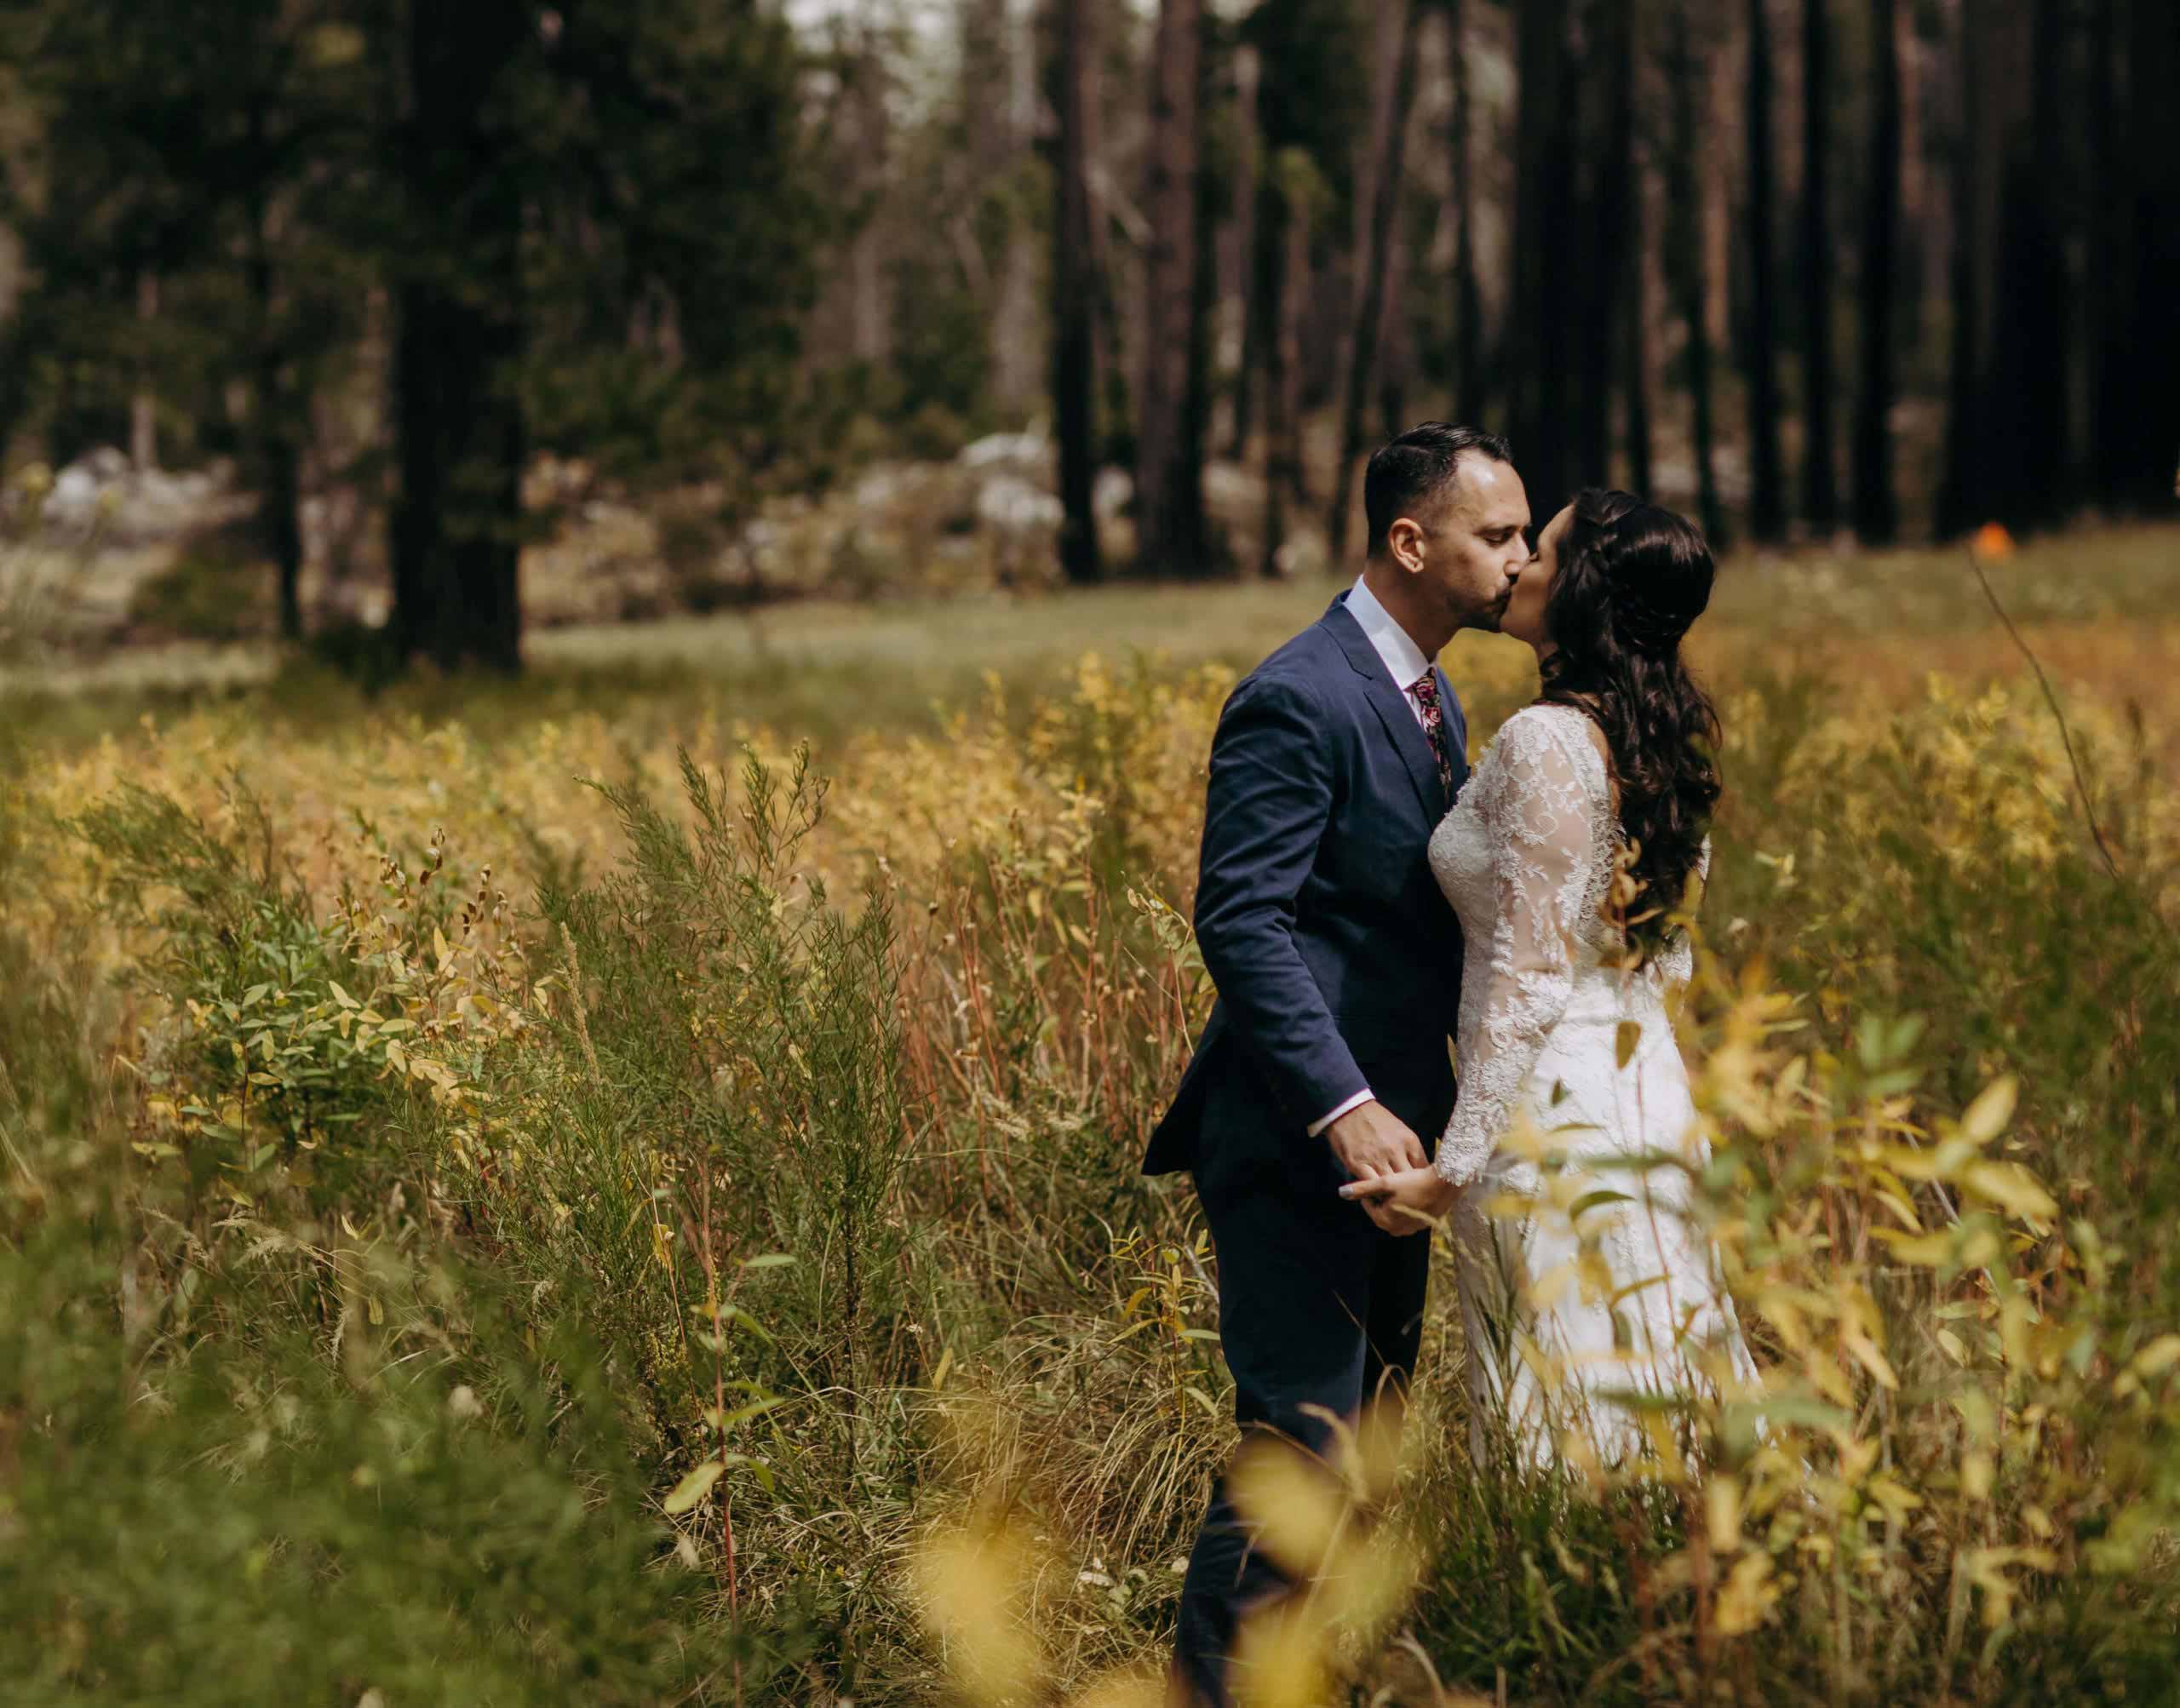 A bride and groom sharing a romantic kiss in a field of tall grass